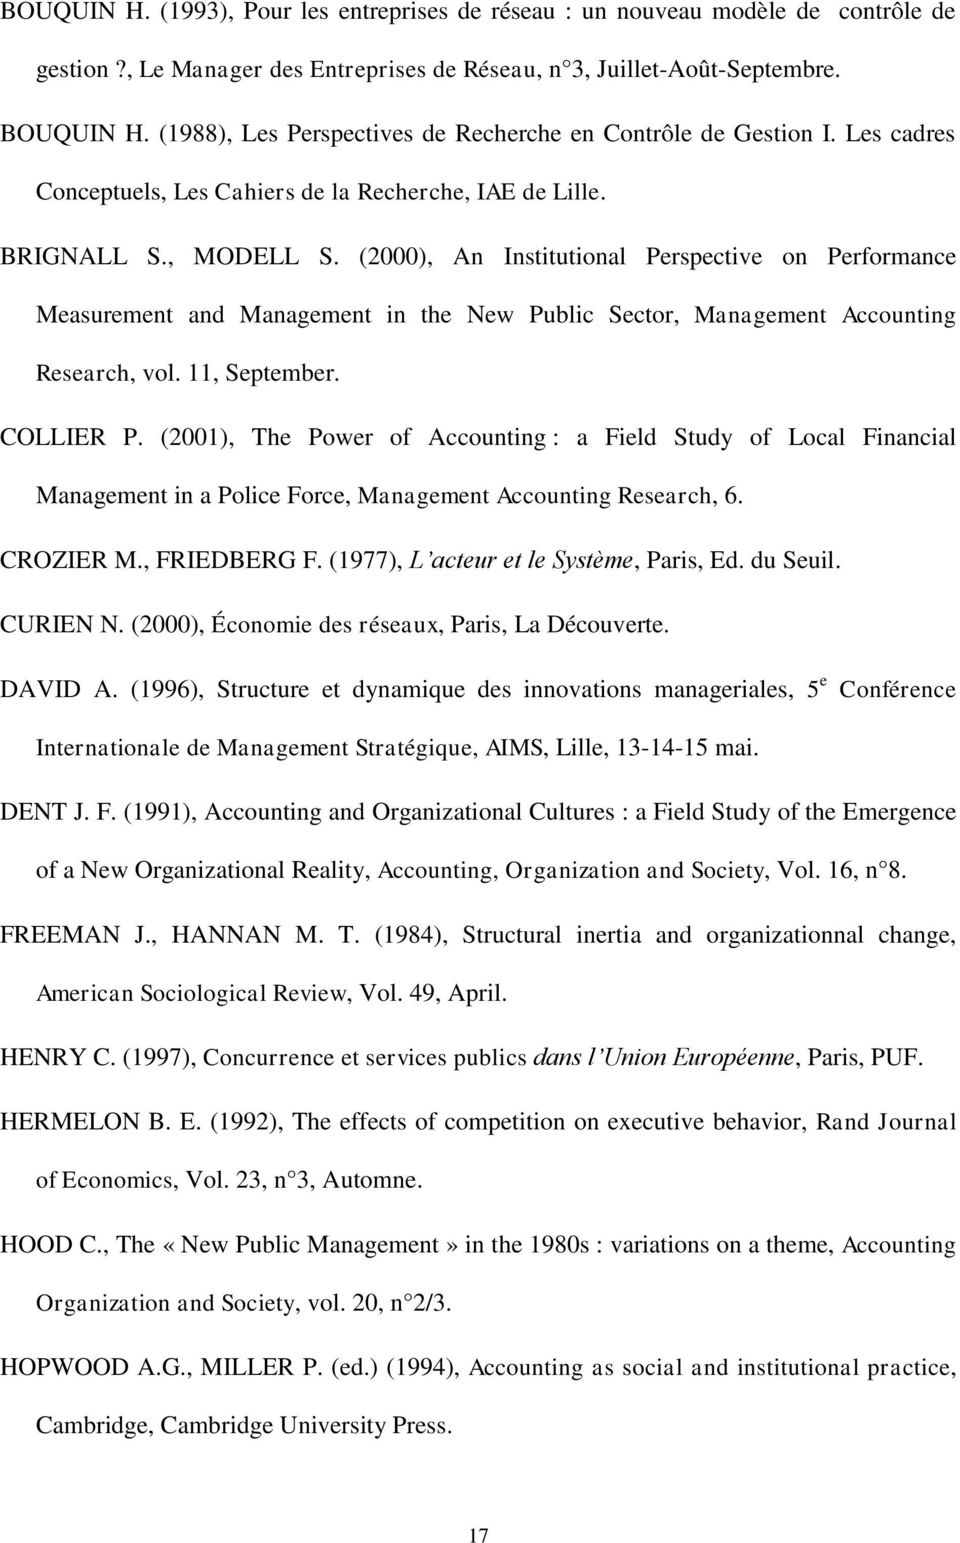 (2000), An Institutional Perspective on Performance Measurement and Management in the New Public Sector, Management Accounting Research, vol. 11, September. COLLIER P.